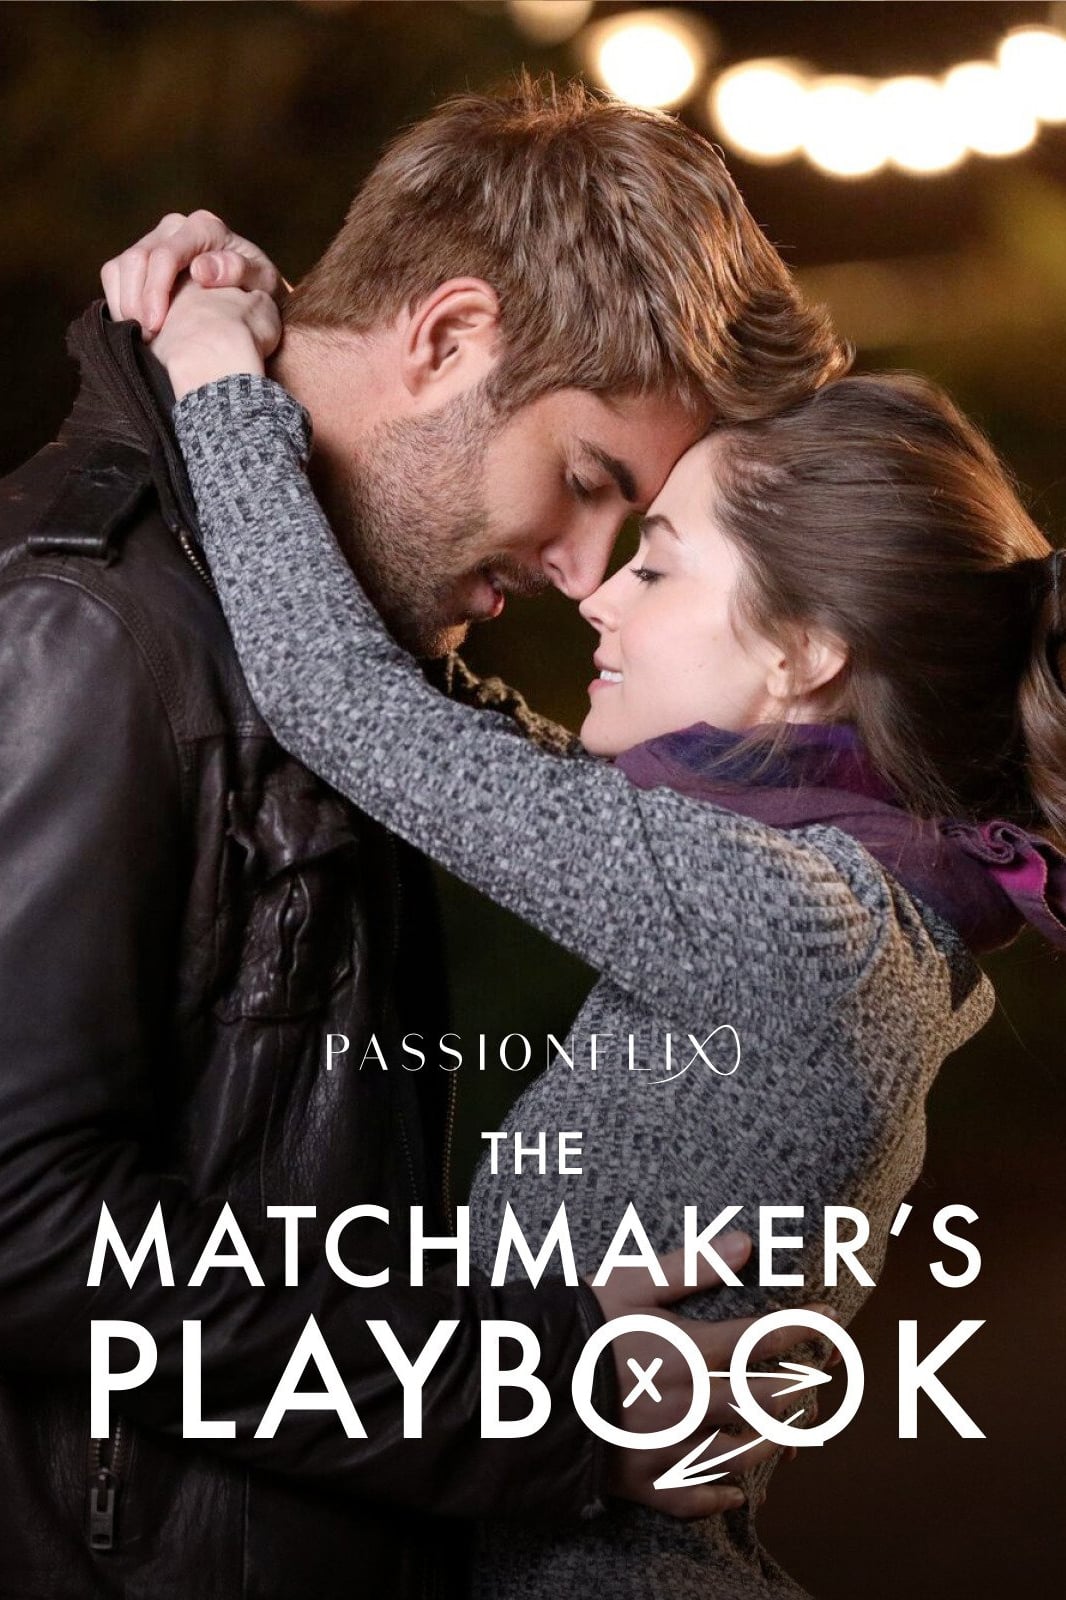 The Matchmaker's Playbook Movie poster